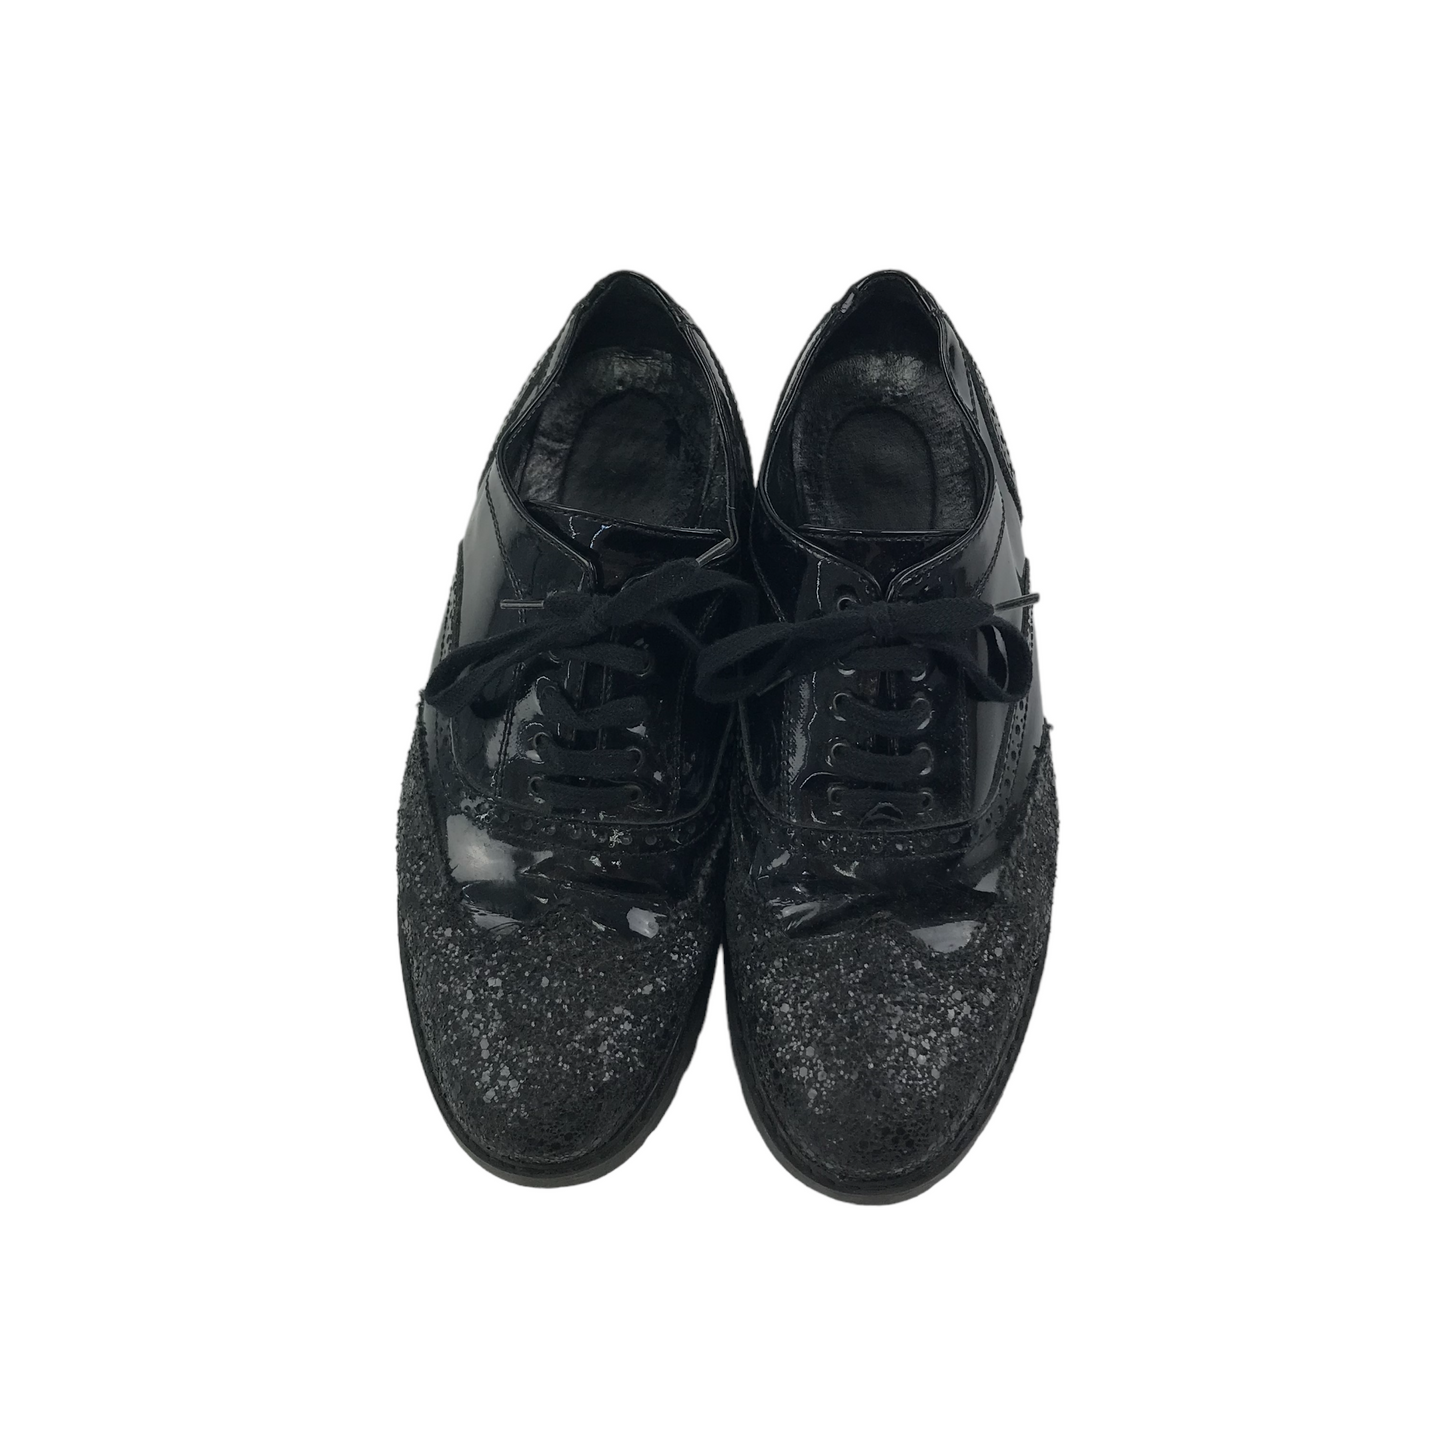 Black Glitter Tips Shoes Shoe Size 5 with Laces